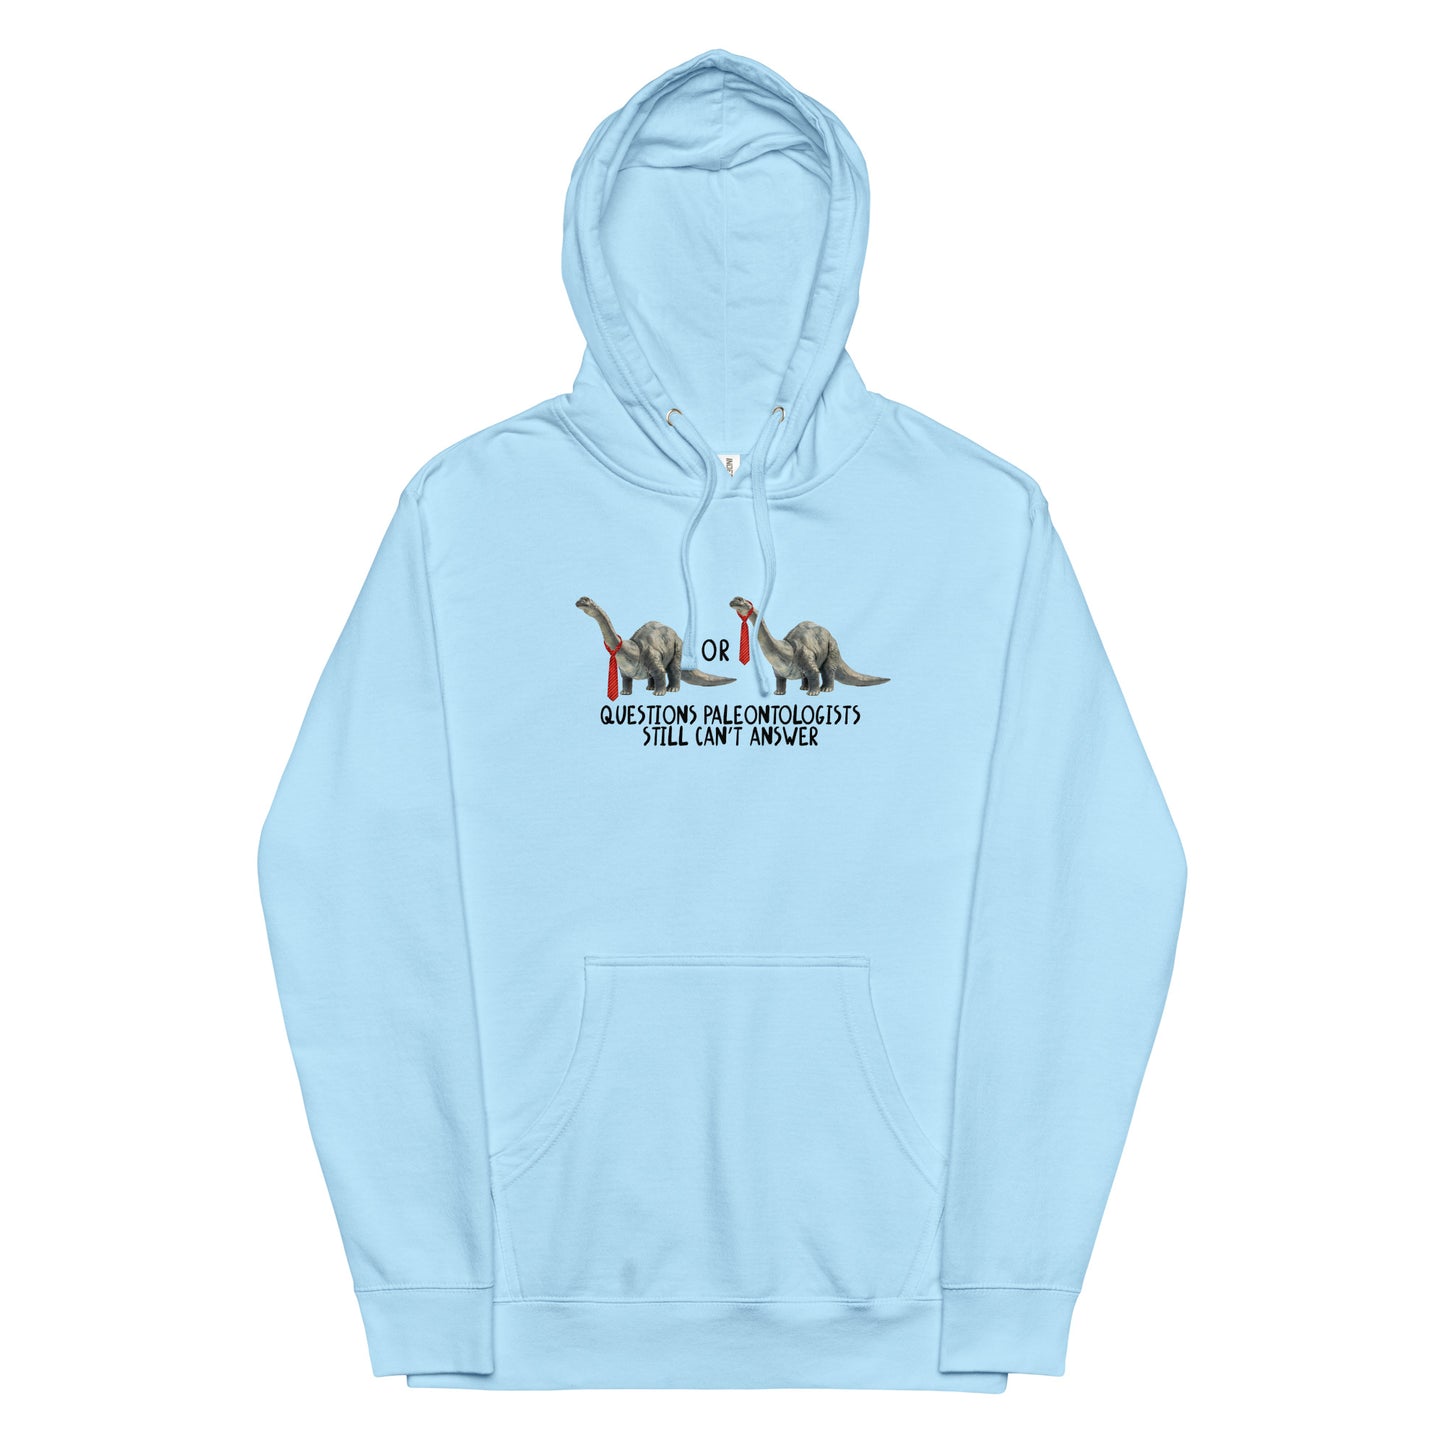 Questions Paleontologists Still Can’t Answer Unisex hoodie